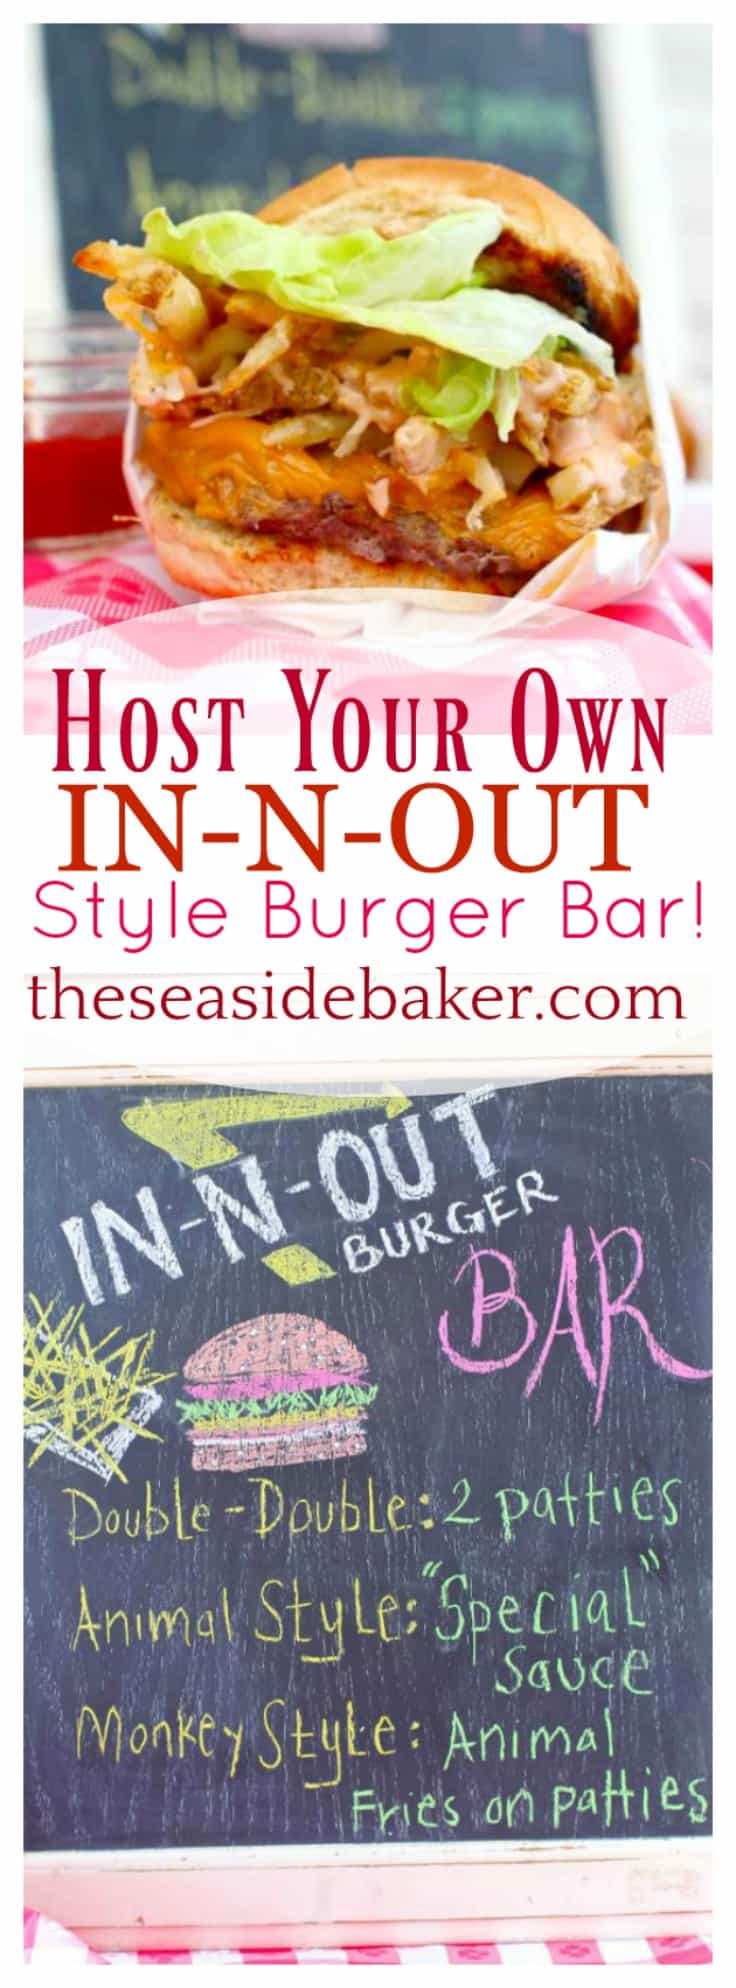 Host an epic summer outdoor In-N-Out Style burger bar complete with Animal Style Sauce. Perfect for the 4th of July and Labor Day